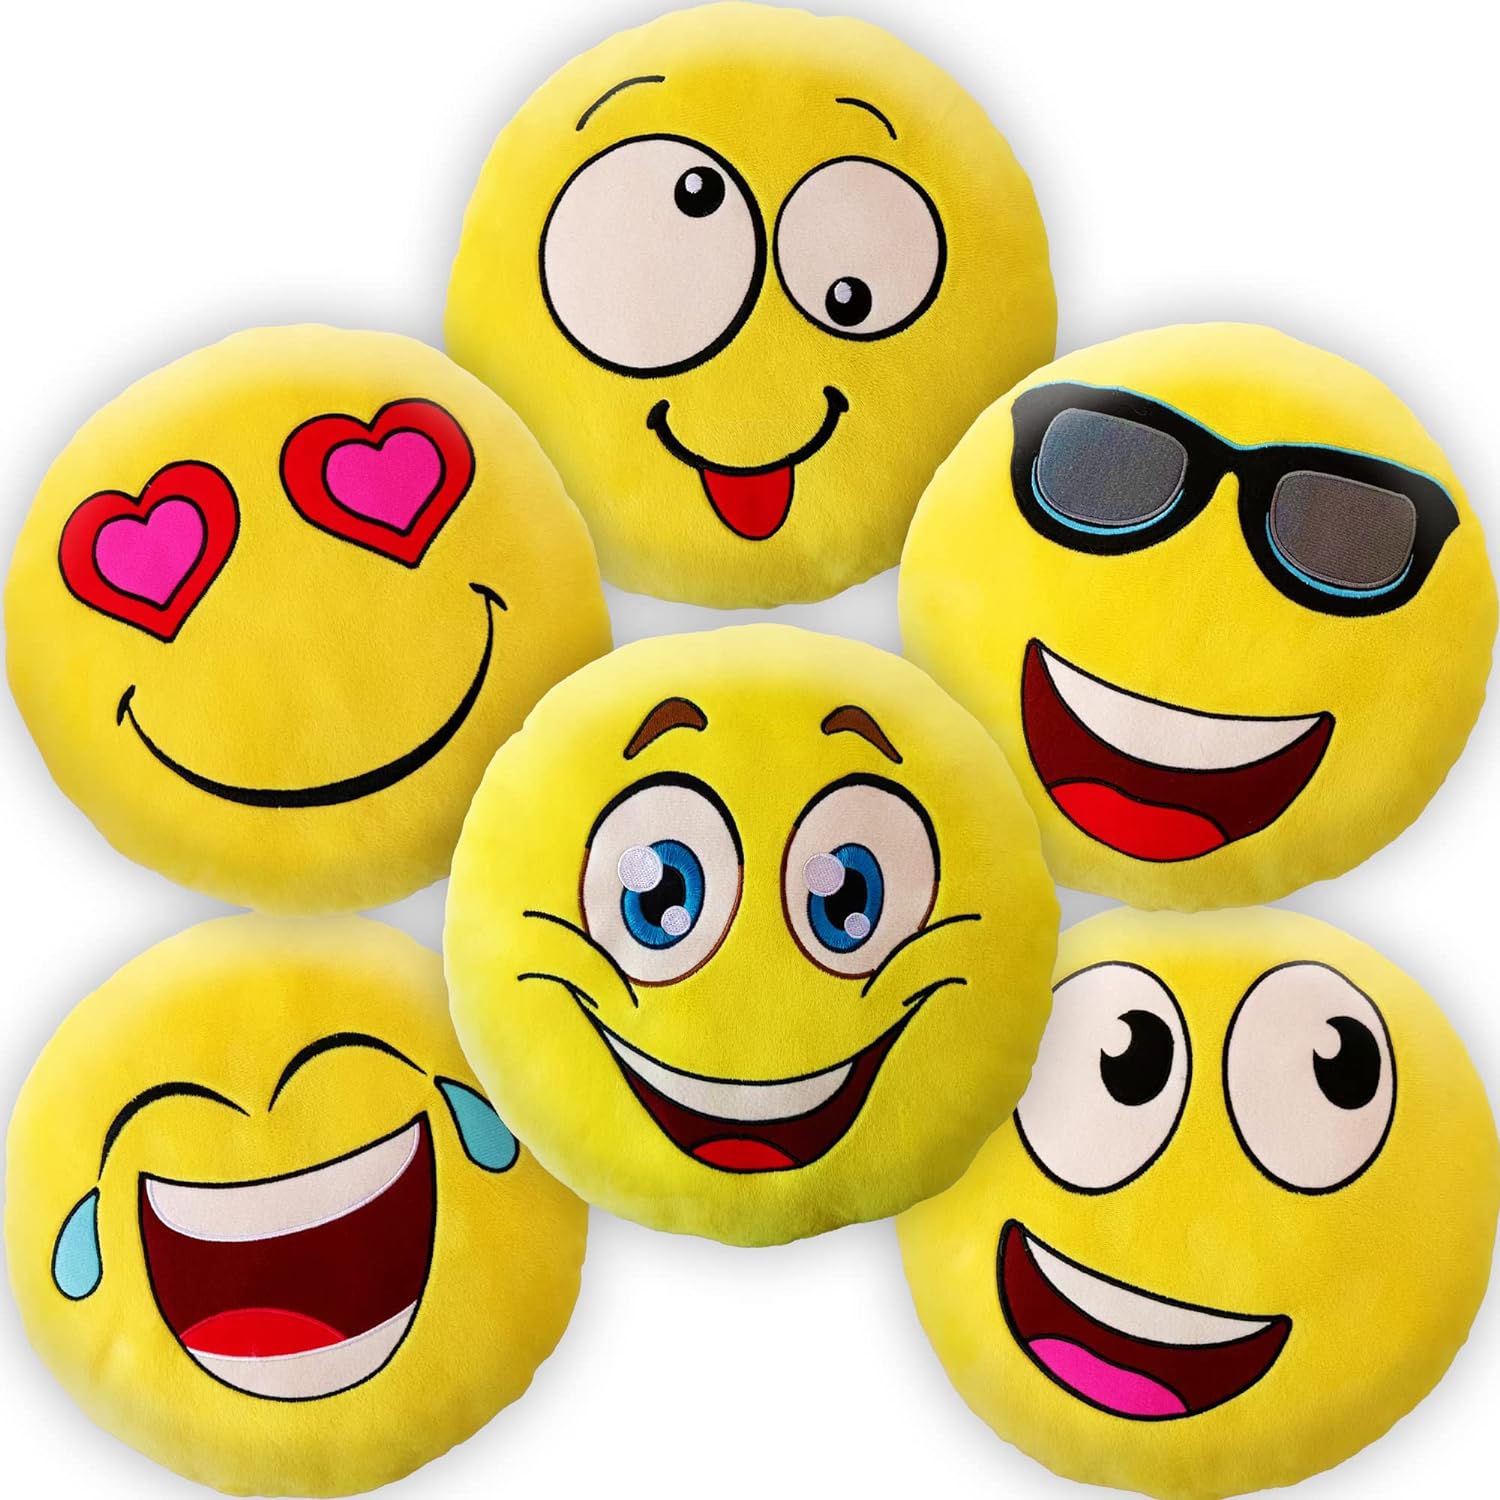 ArtCreativity Assorted Emoticon Pillows, Pack of 6, Yellow Smile Face Cushions, Soft Stuffed Emoticon Decorations, Cute Living Room Bedroom Décor, Emoticon Birthday Party Favors for Kids